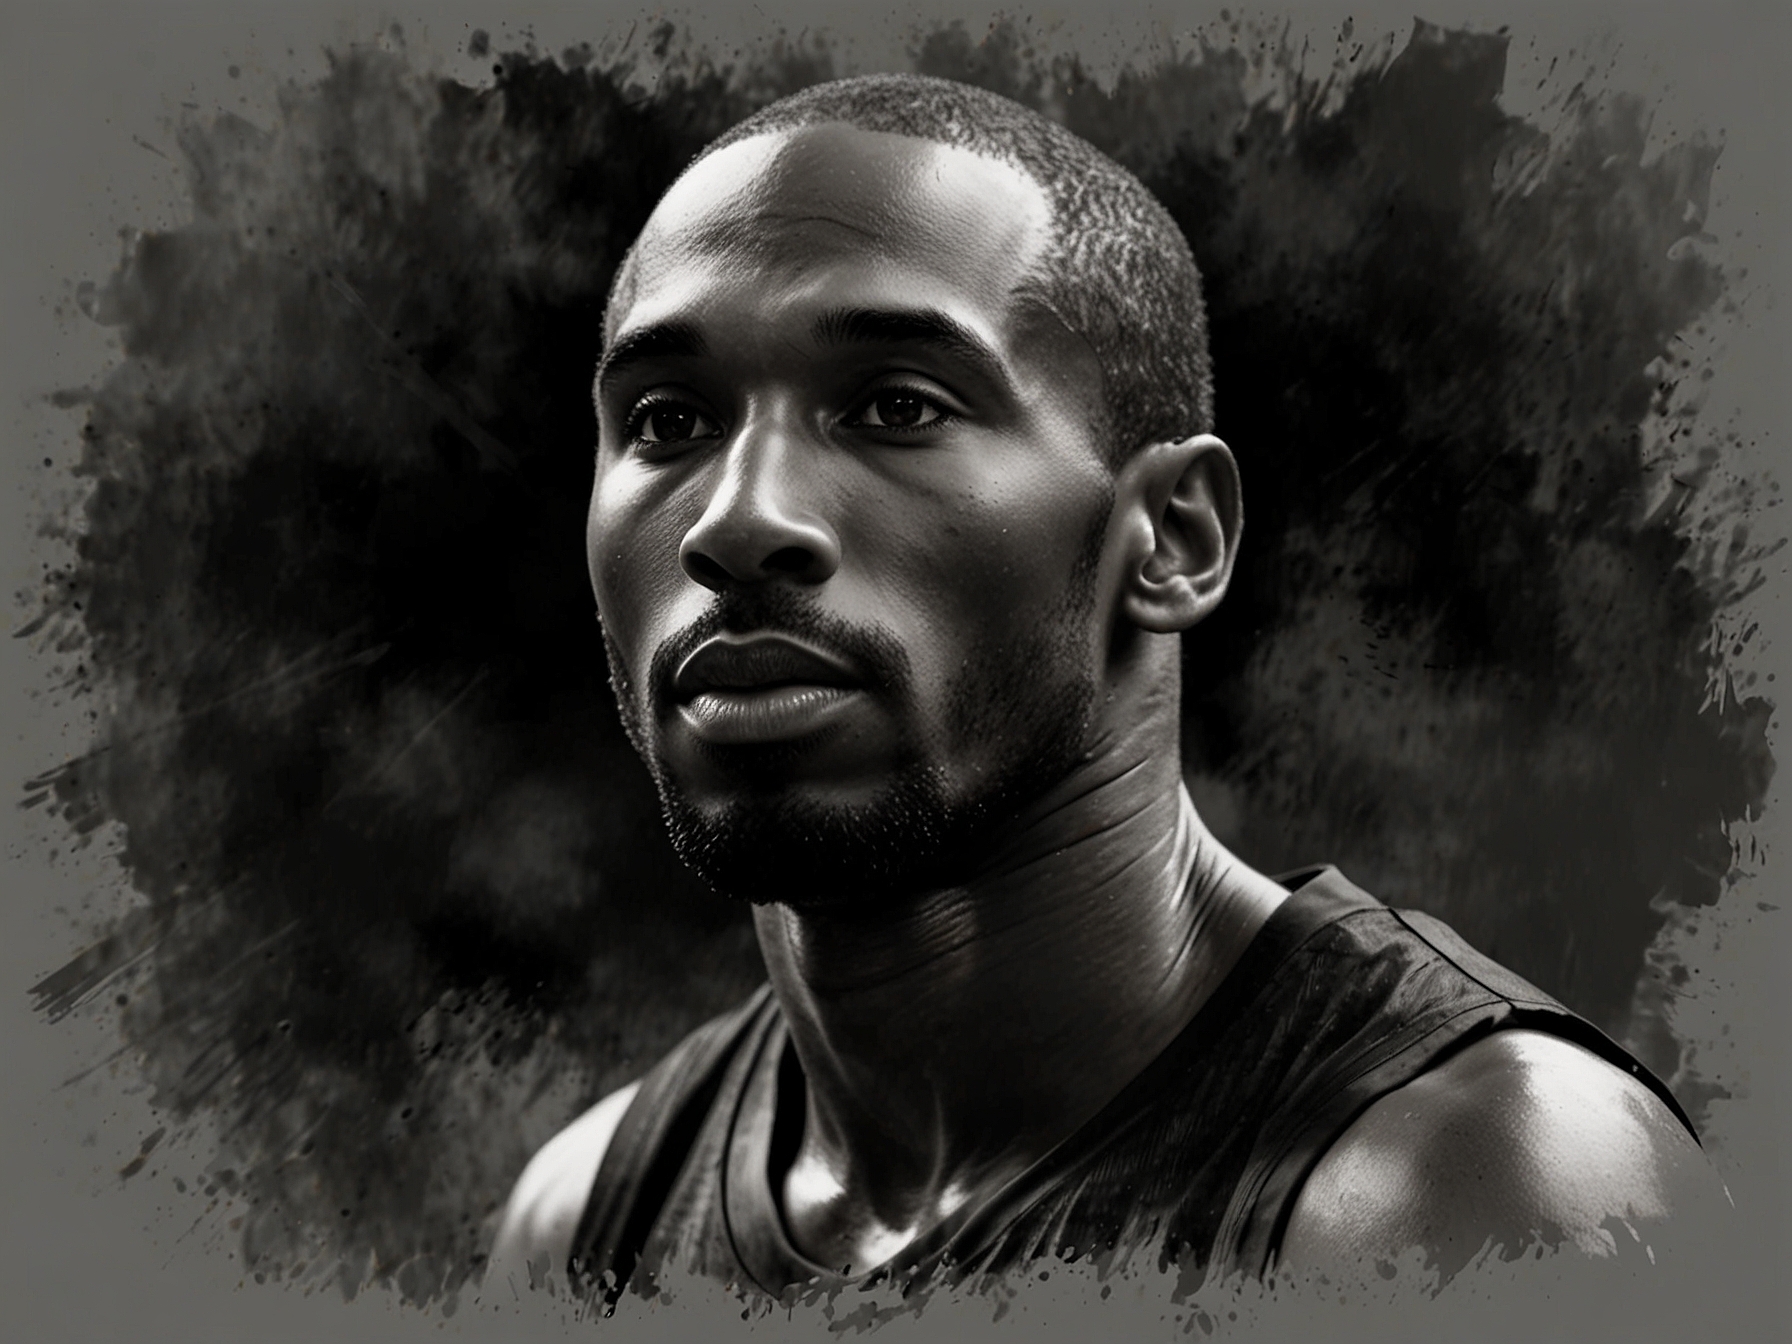 Kobe Bryant on the court, embodying the 'Black Mamba' persona with a fierce expression and focused demeanor, symbolizing his readiness to strike and unwavering commitment to the game.